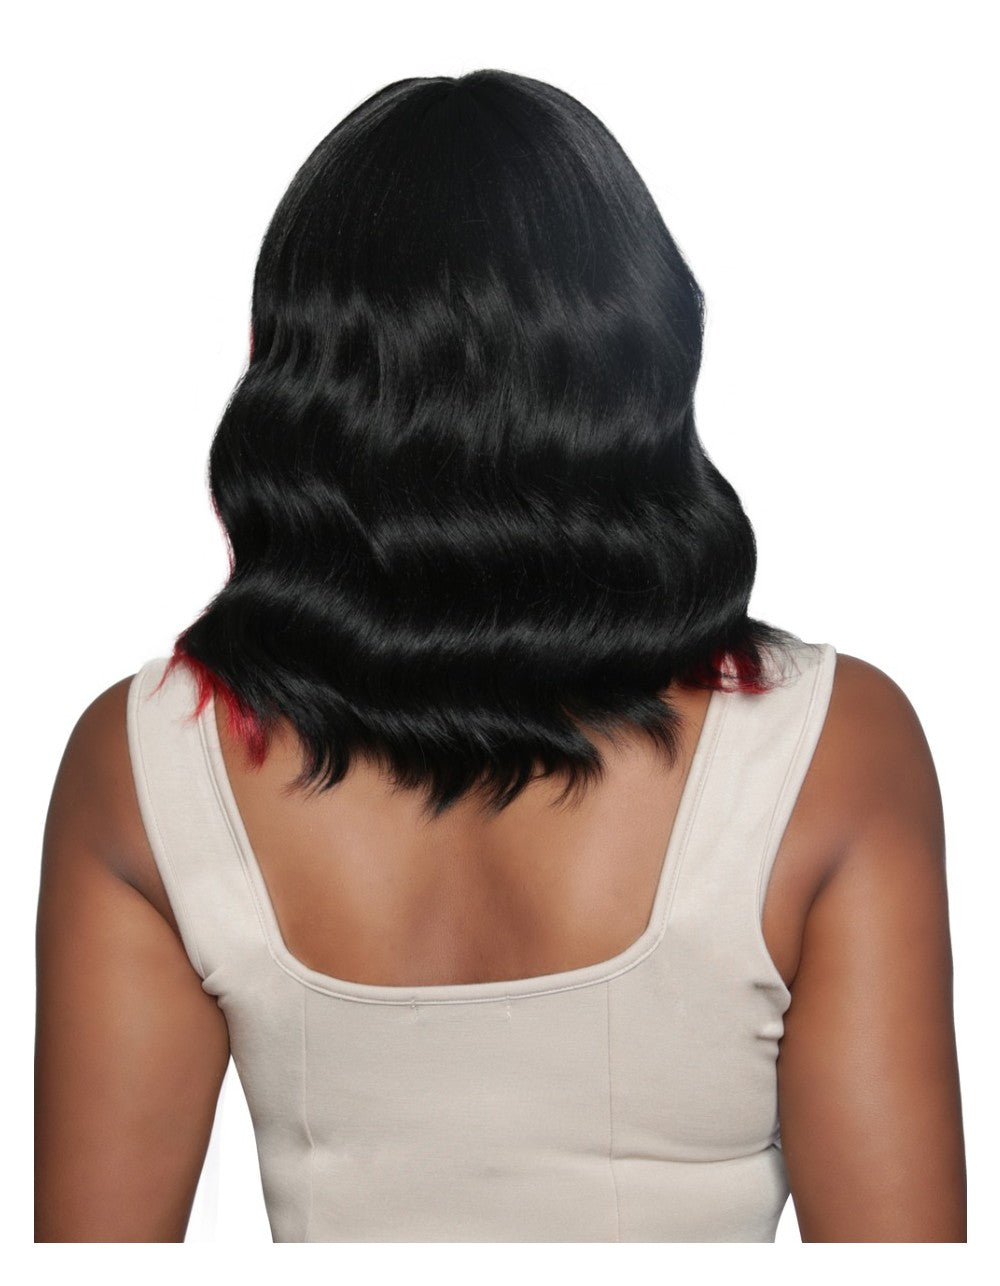 Mane Concept Brown Sugar Human Hair Mix Body Wave Wig Sunny Day BSEV101 - Elevate Styles